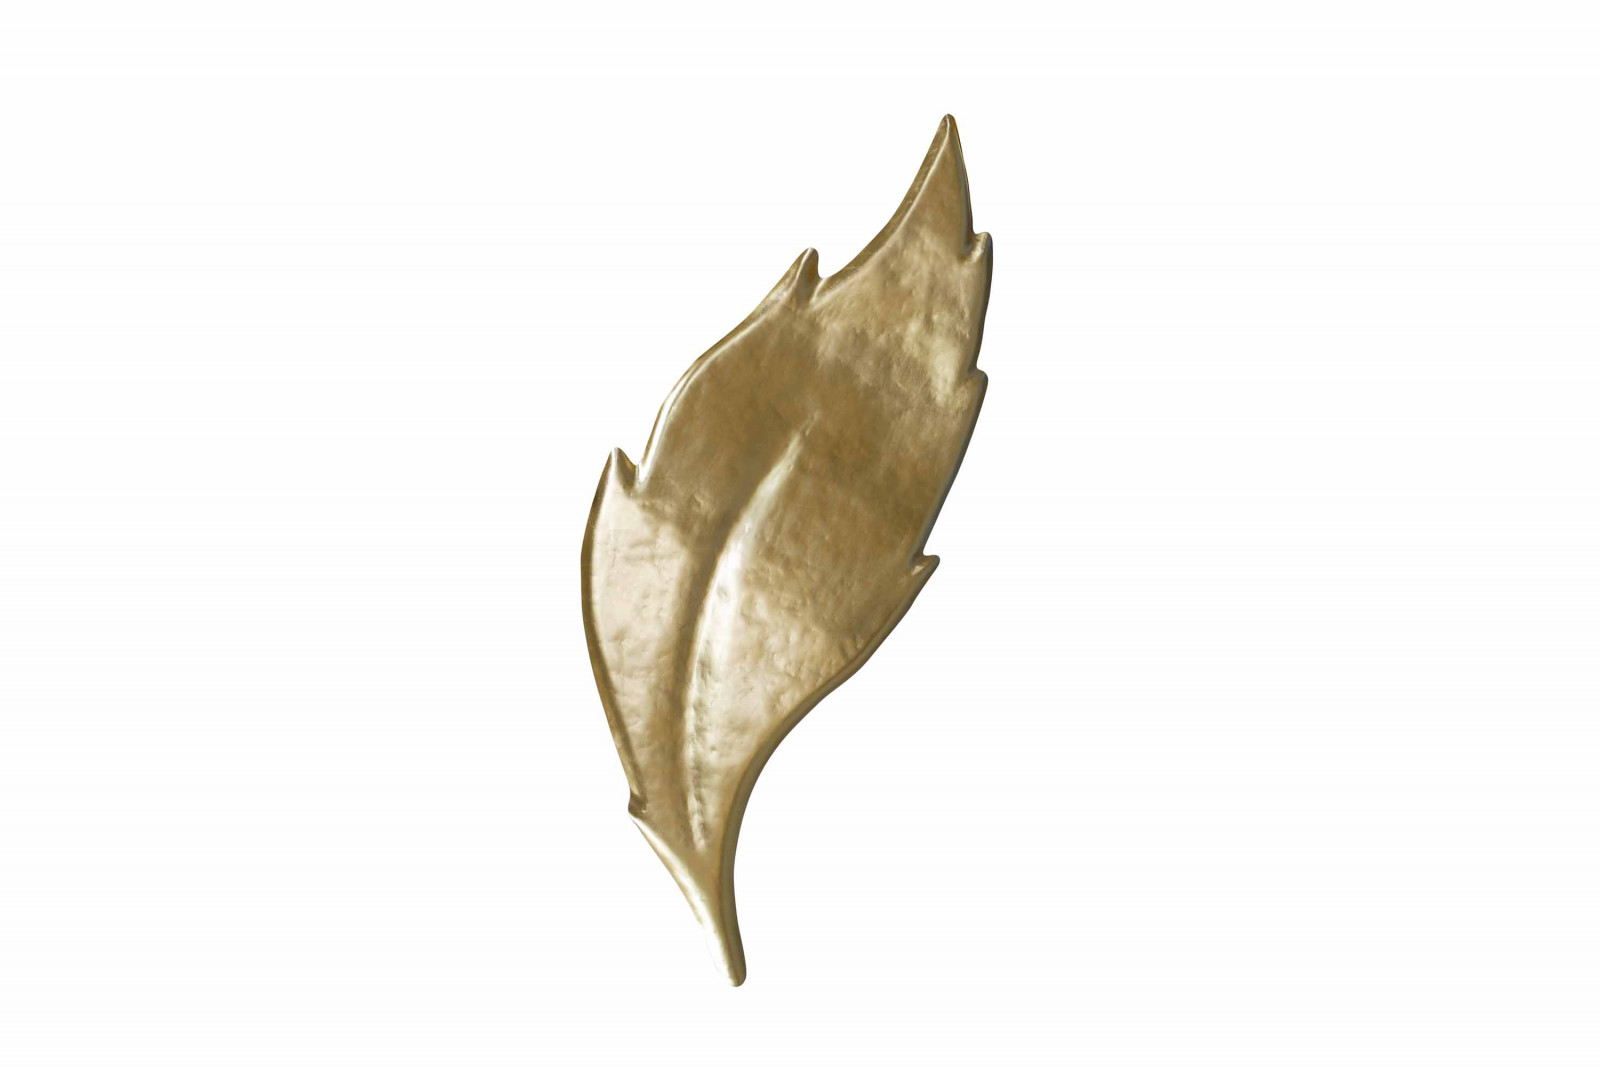 wall_lamp_panel_nature_exclusive_artistic_gold_leaf_karpa_Ma-1684-1600-1400-100